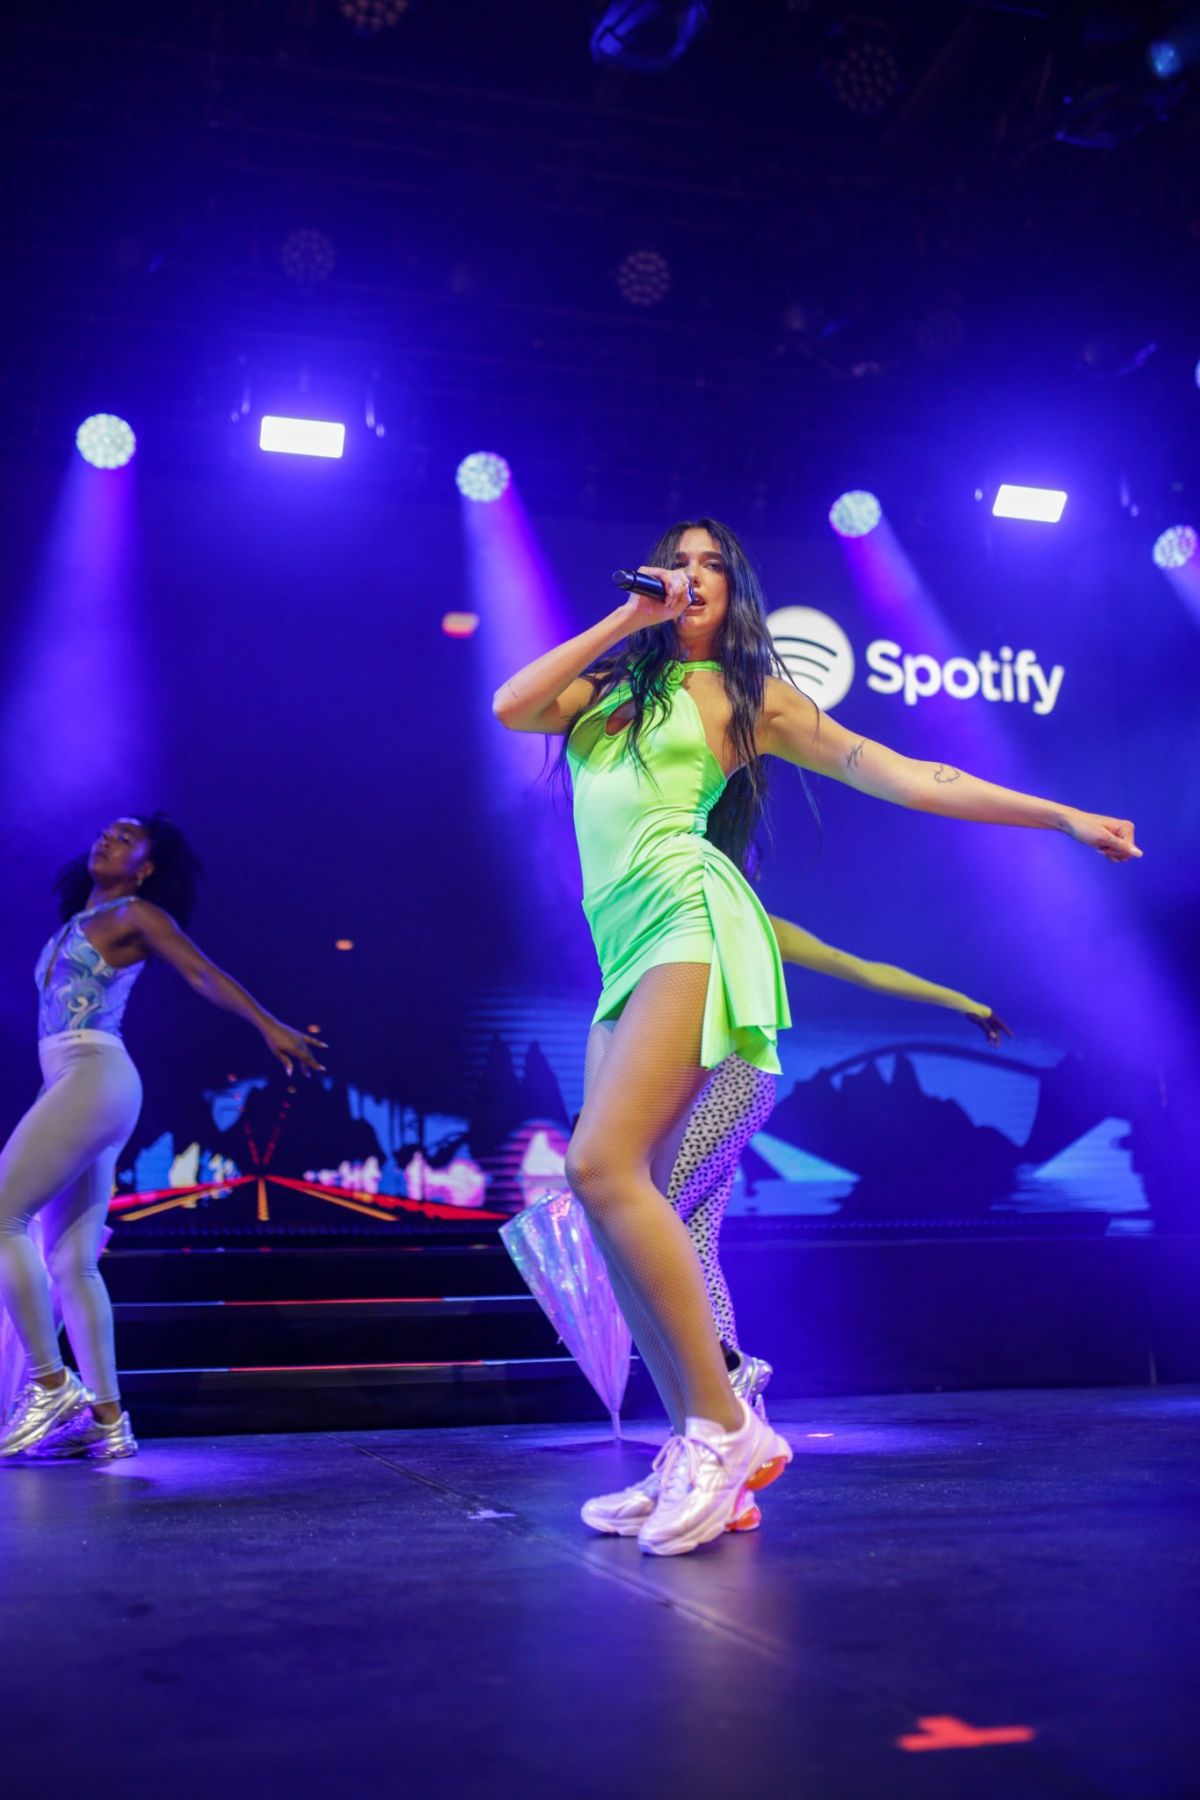 DUA LIPA Performs at Spotify Beach at Cannes Lions 2022 in Cannes 06/21